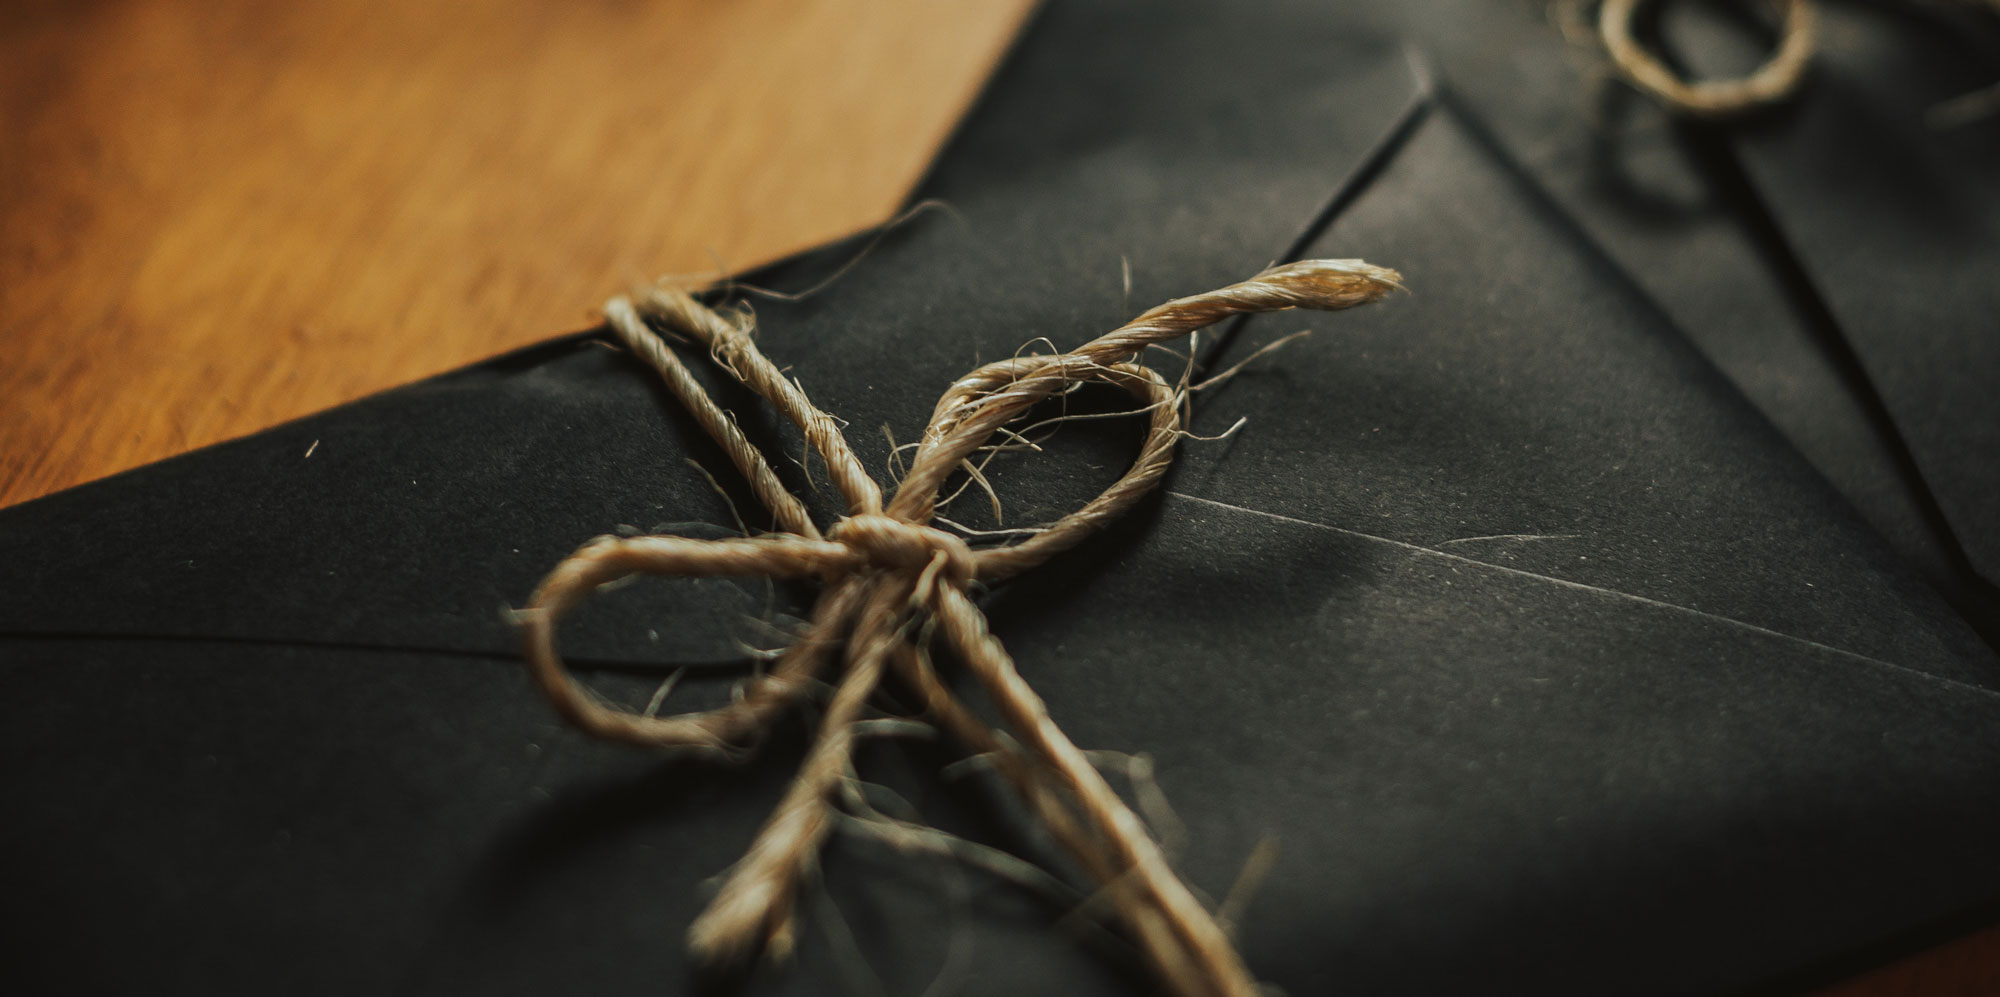 Black envelopes neatly arranged and secured with twine on a polished wooden table.